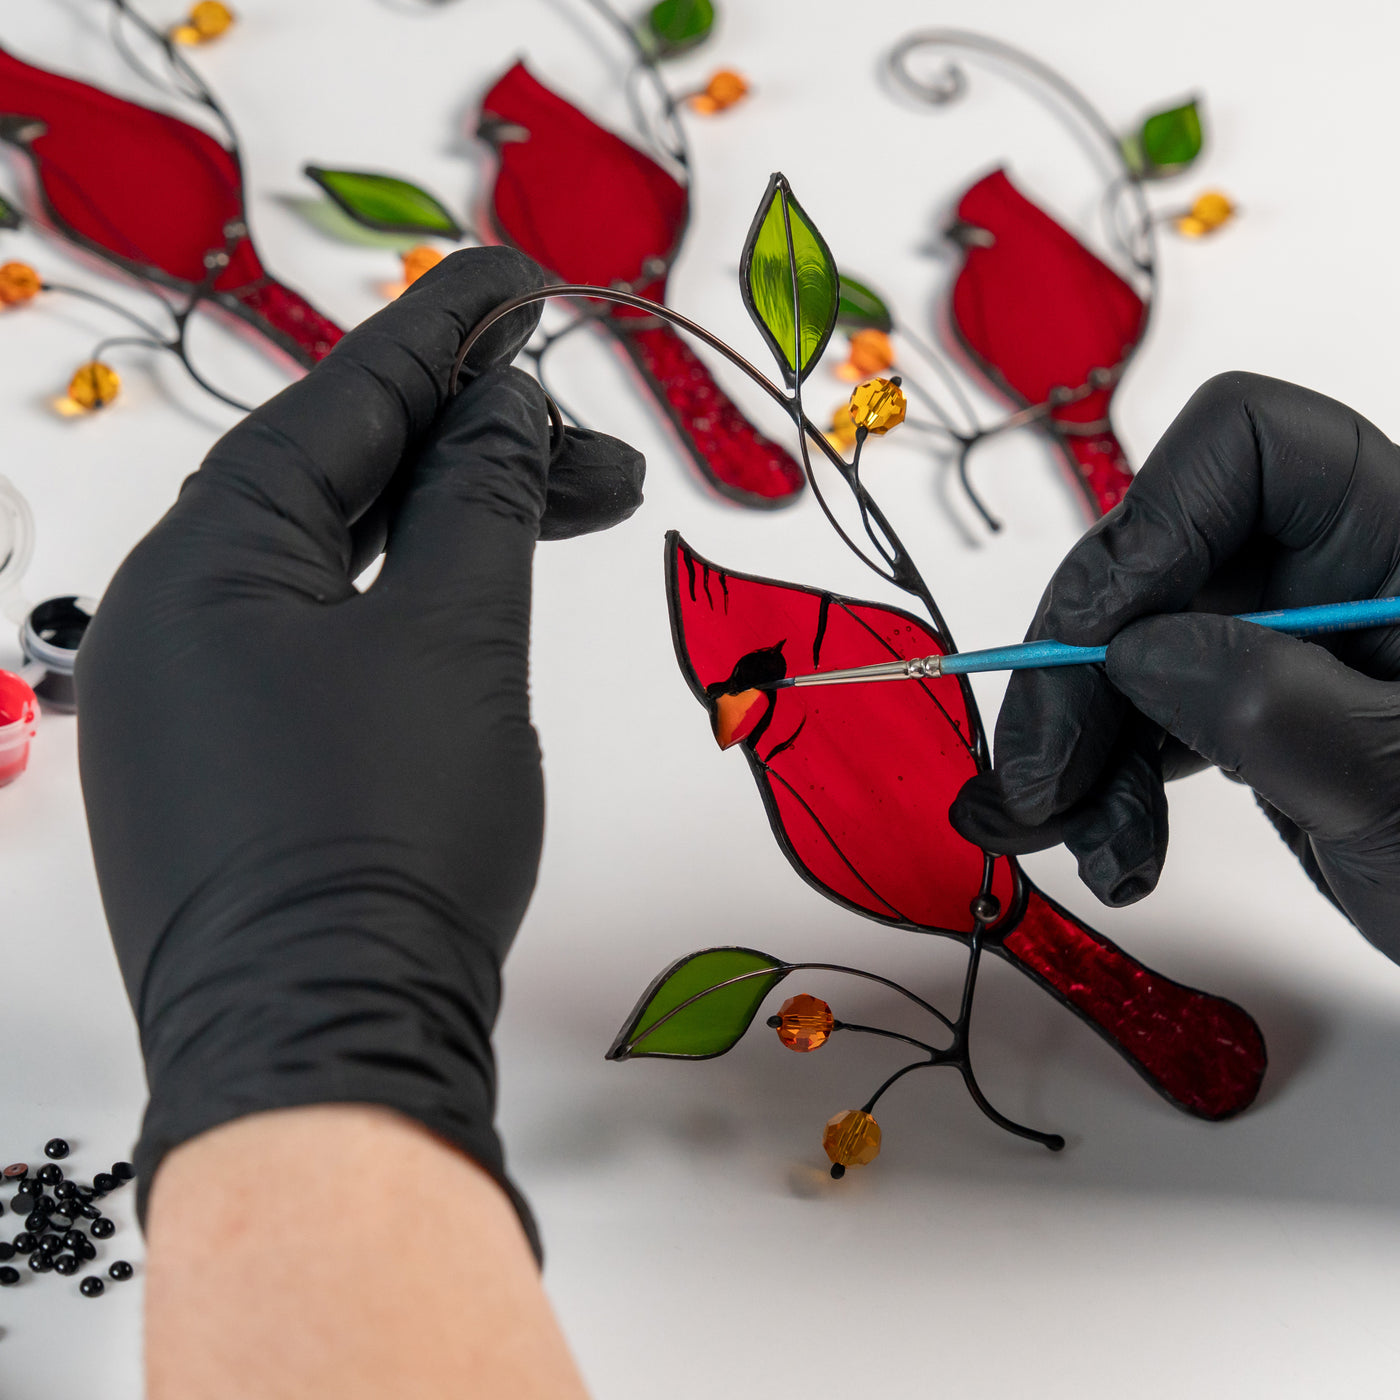 the handcrafting process of the cardinal bird suncatcher made of stained glass